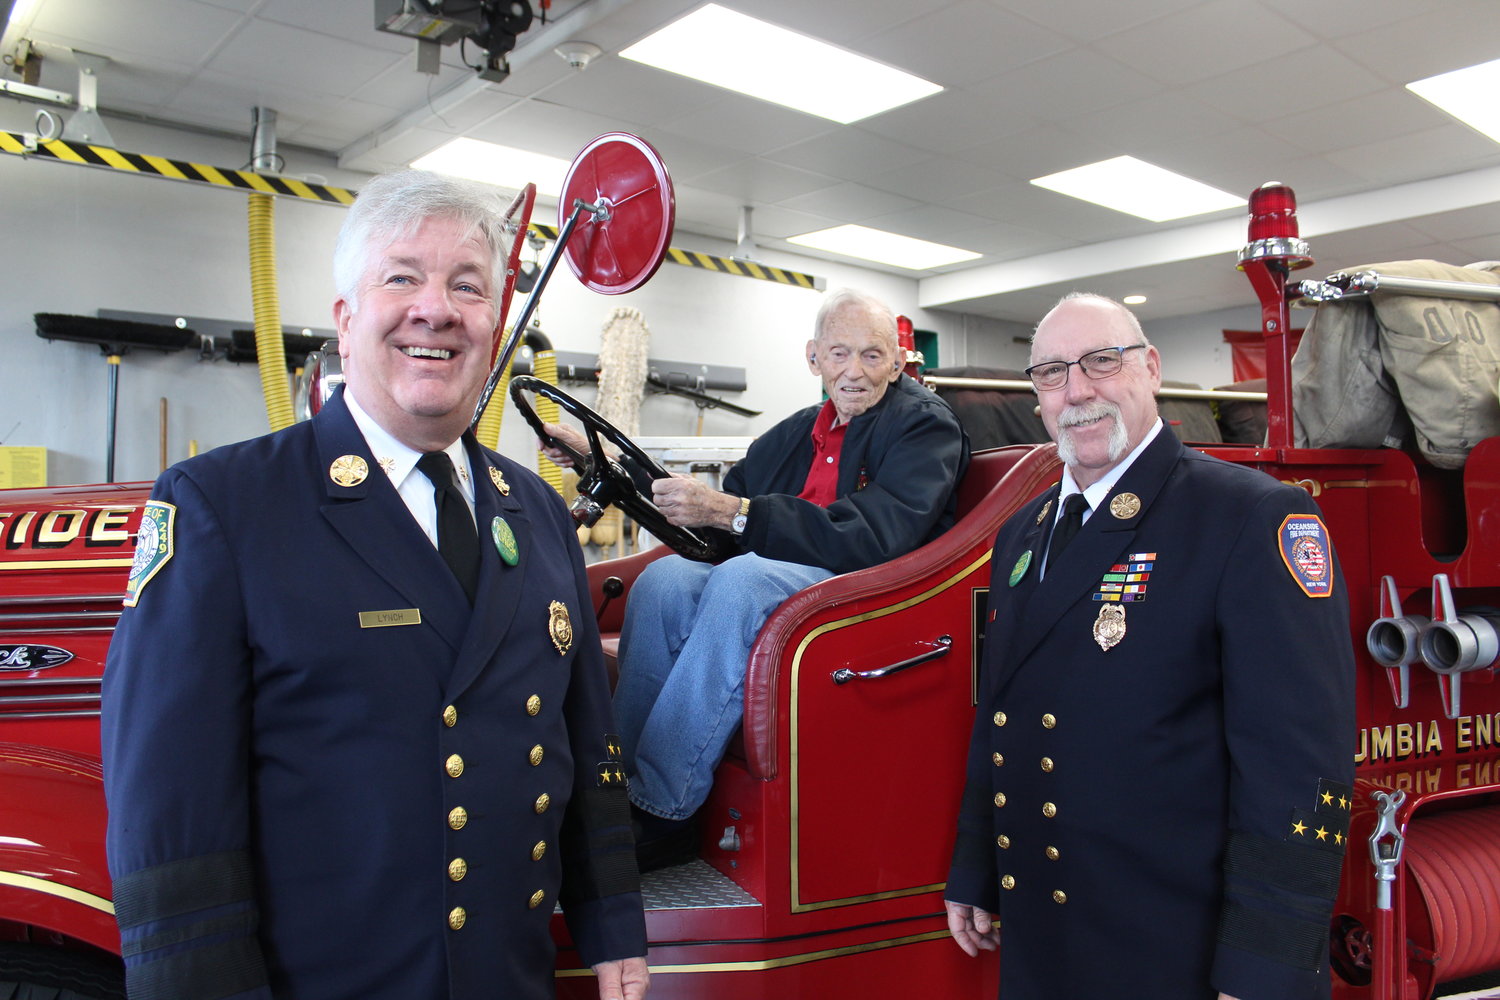 An ecstatic Karl Thuge sat at the driver’s wheel of the historic 1947 Mack truck that he and members of the Columbia Engine Company No. 1 Historical Committee — including Bill Lynch, left, and Fredrick Robinson — sought. Thuge worked in the same factory in which the truck was built in 1947.